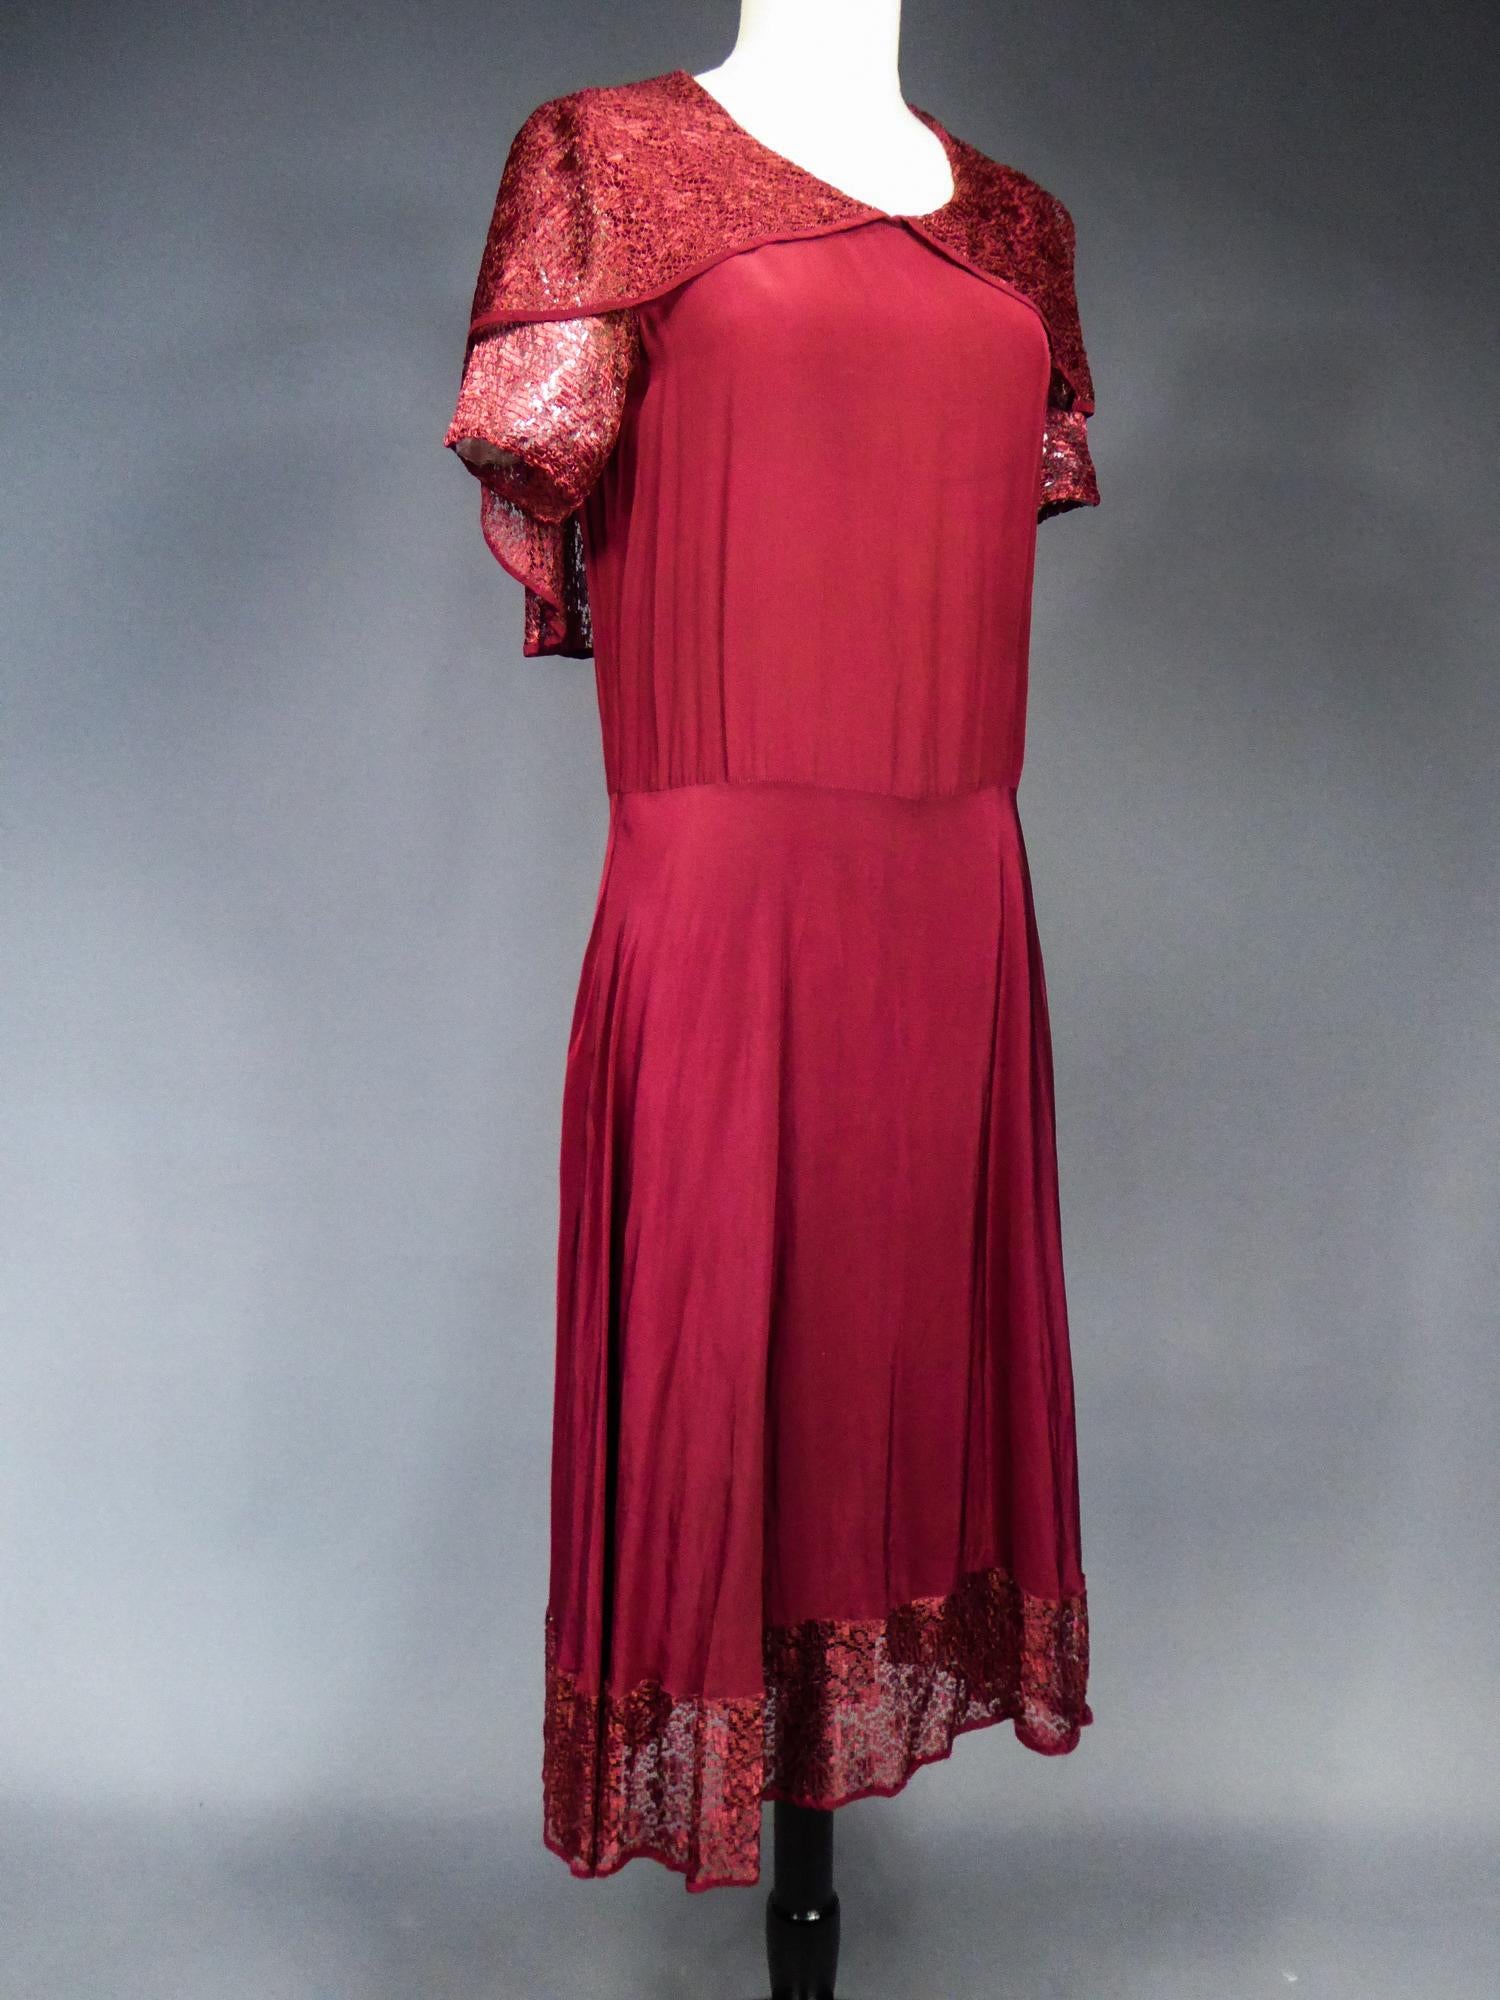 Women's A French Day Dress in Crepe Silk and Lace Circa 1935/1940 For Sale